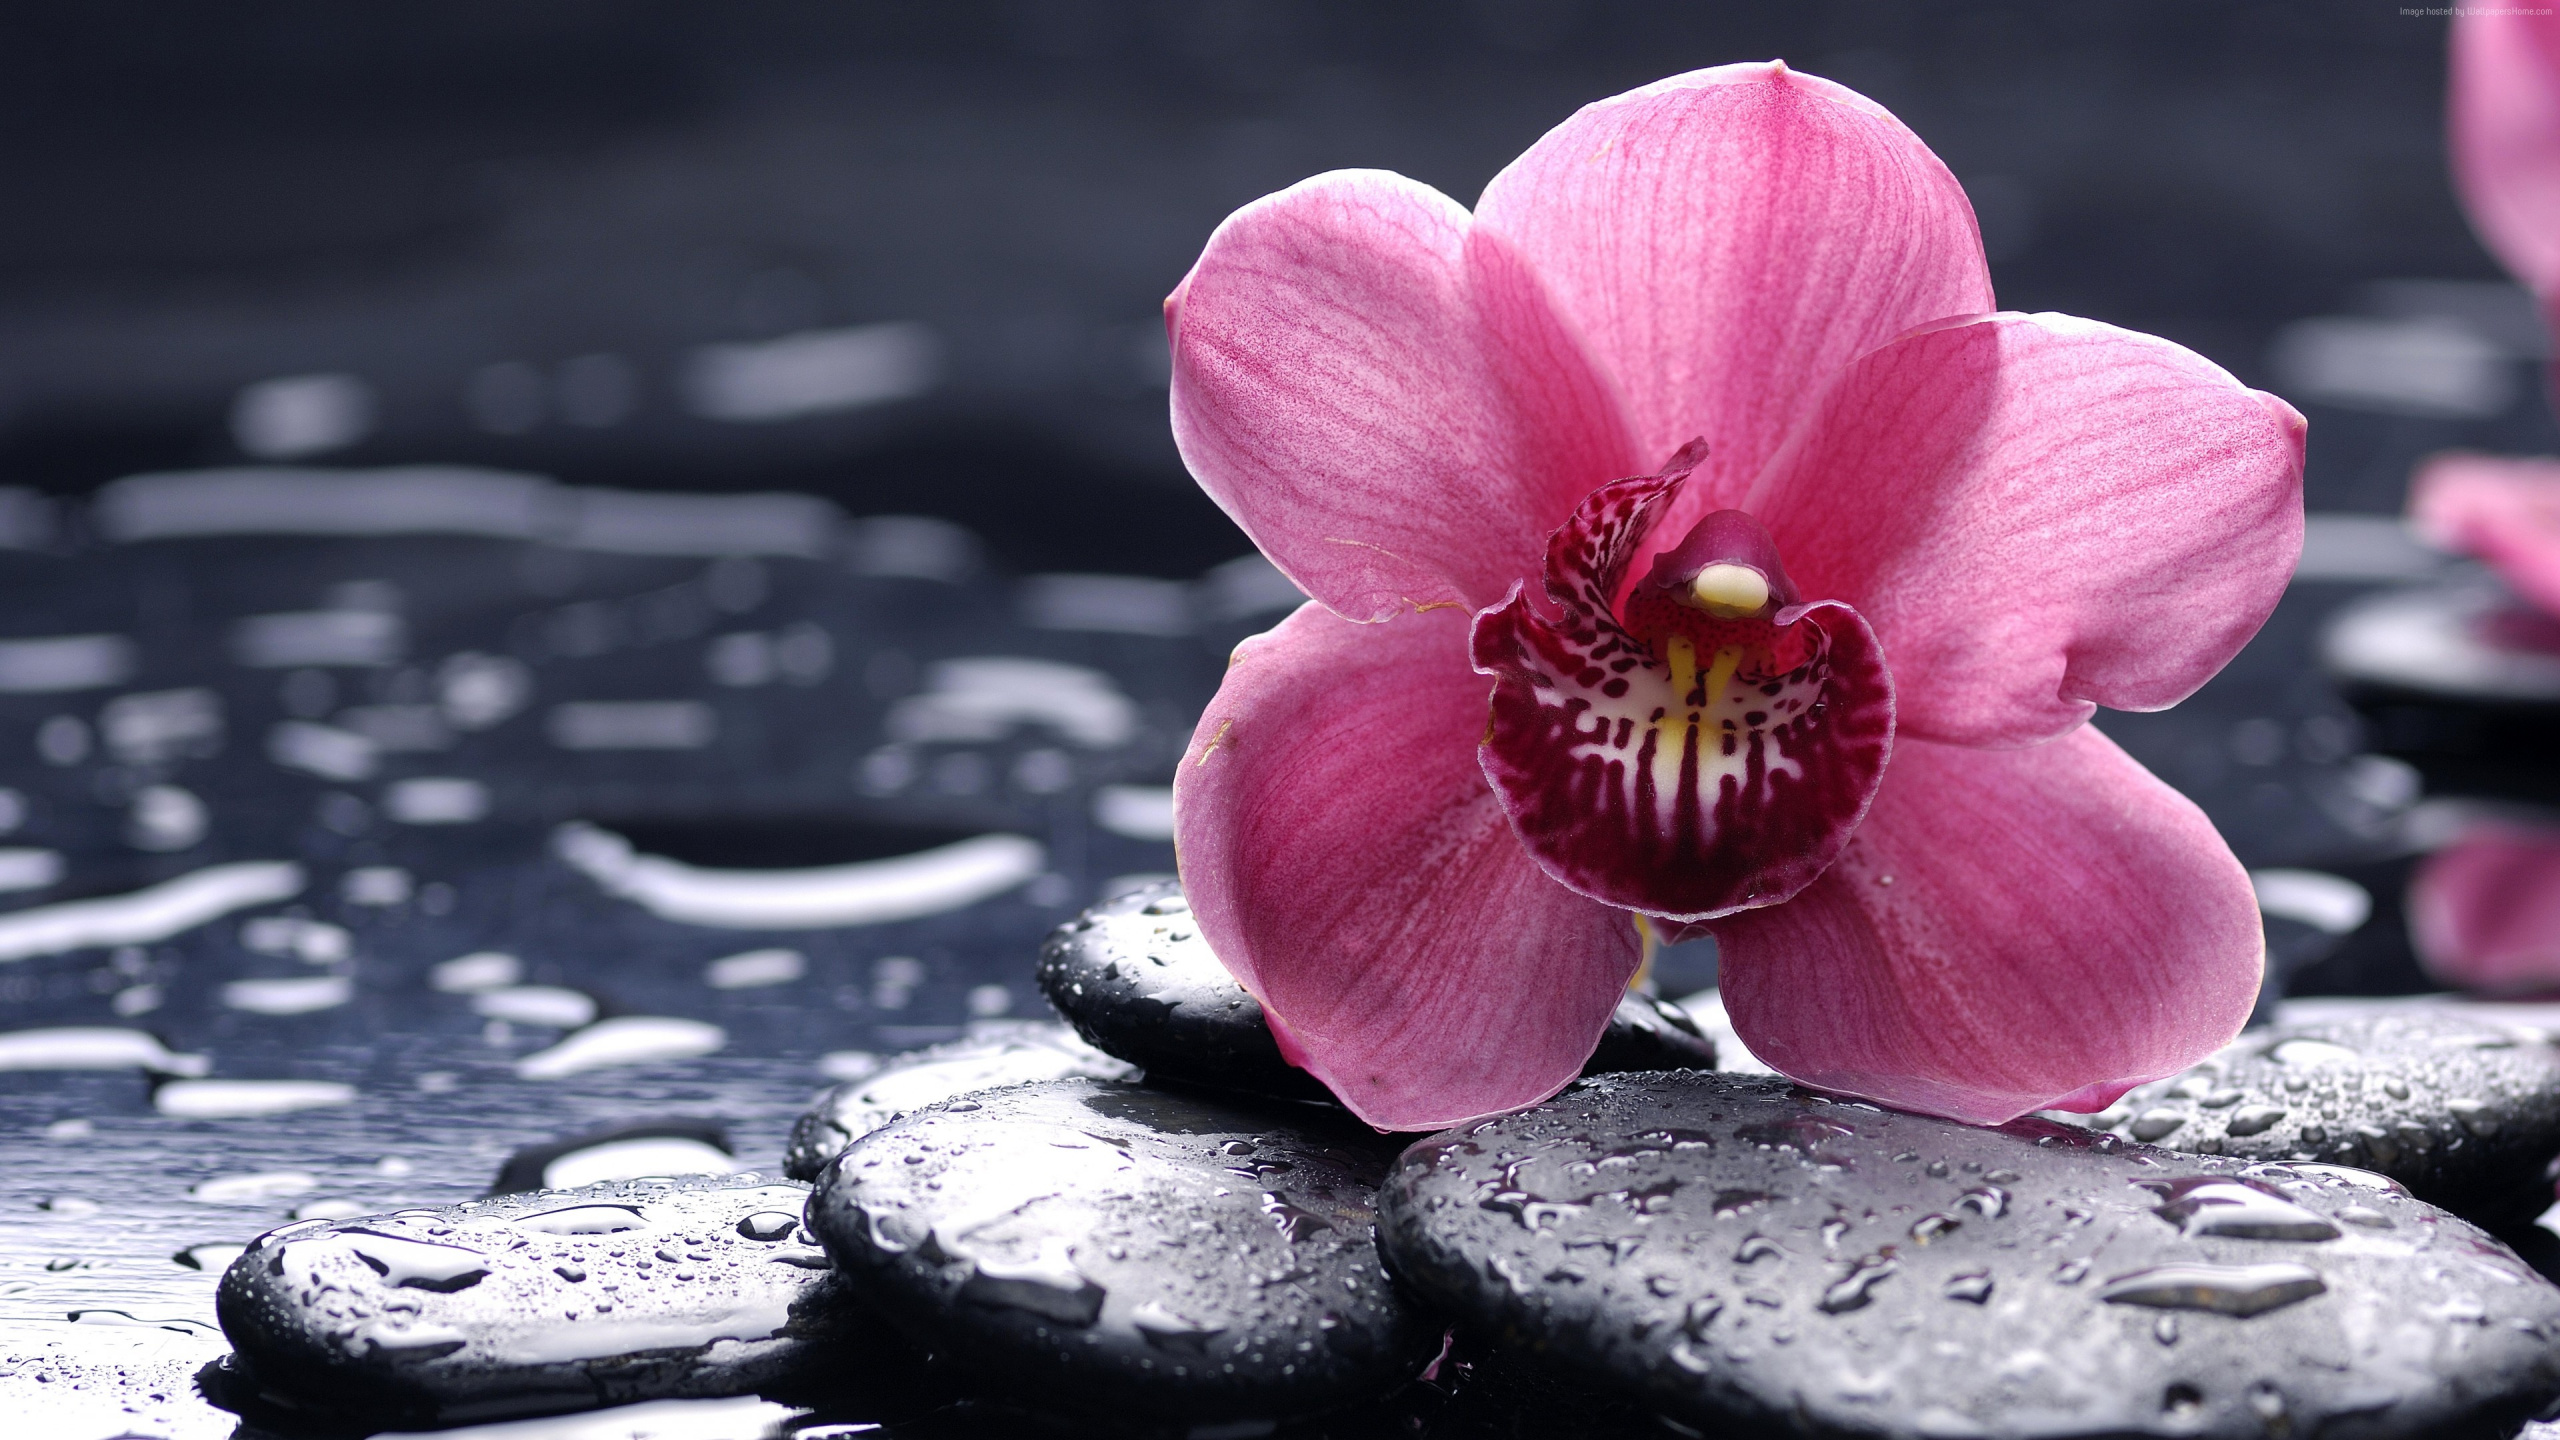 Pink Flower on Black Surface. Wallpaper in 2560x1440 Resolution